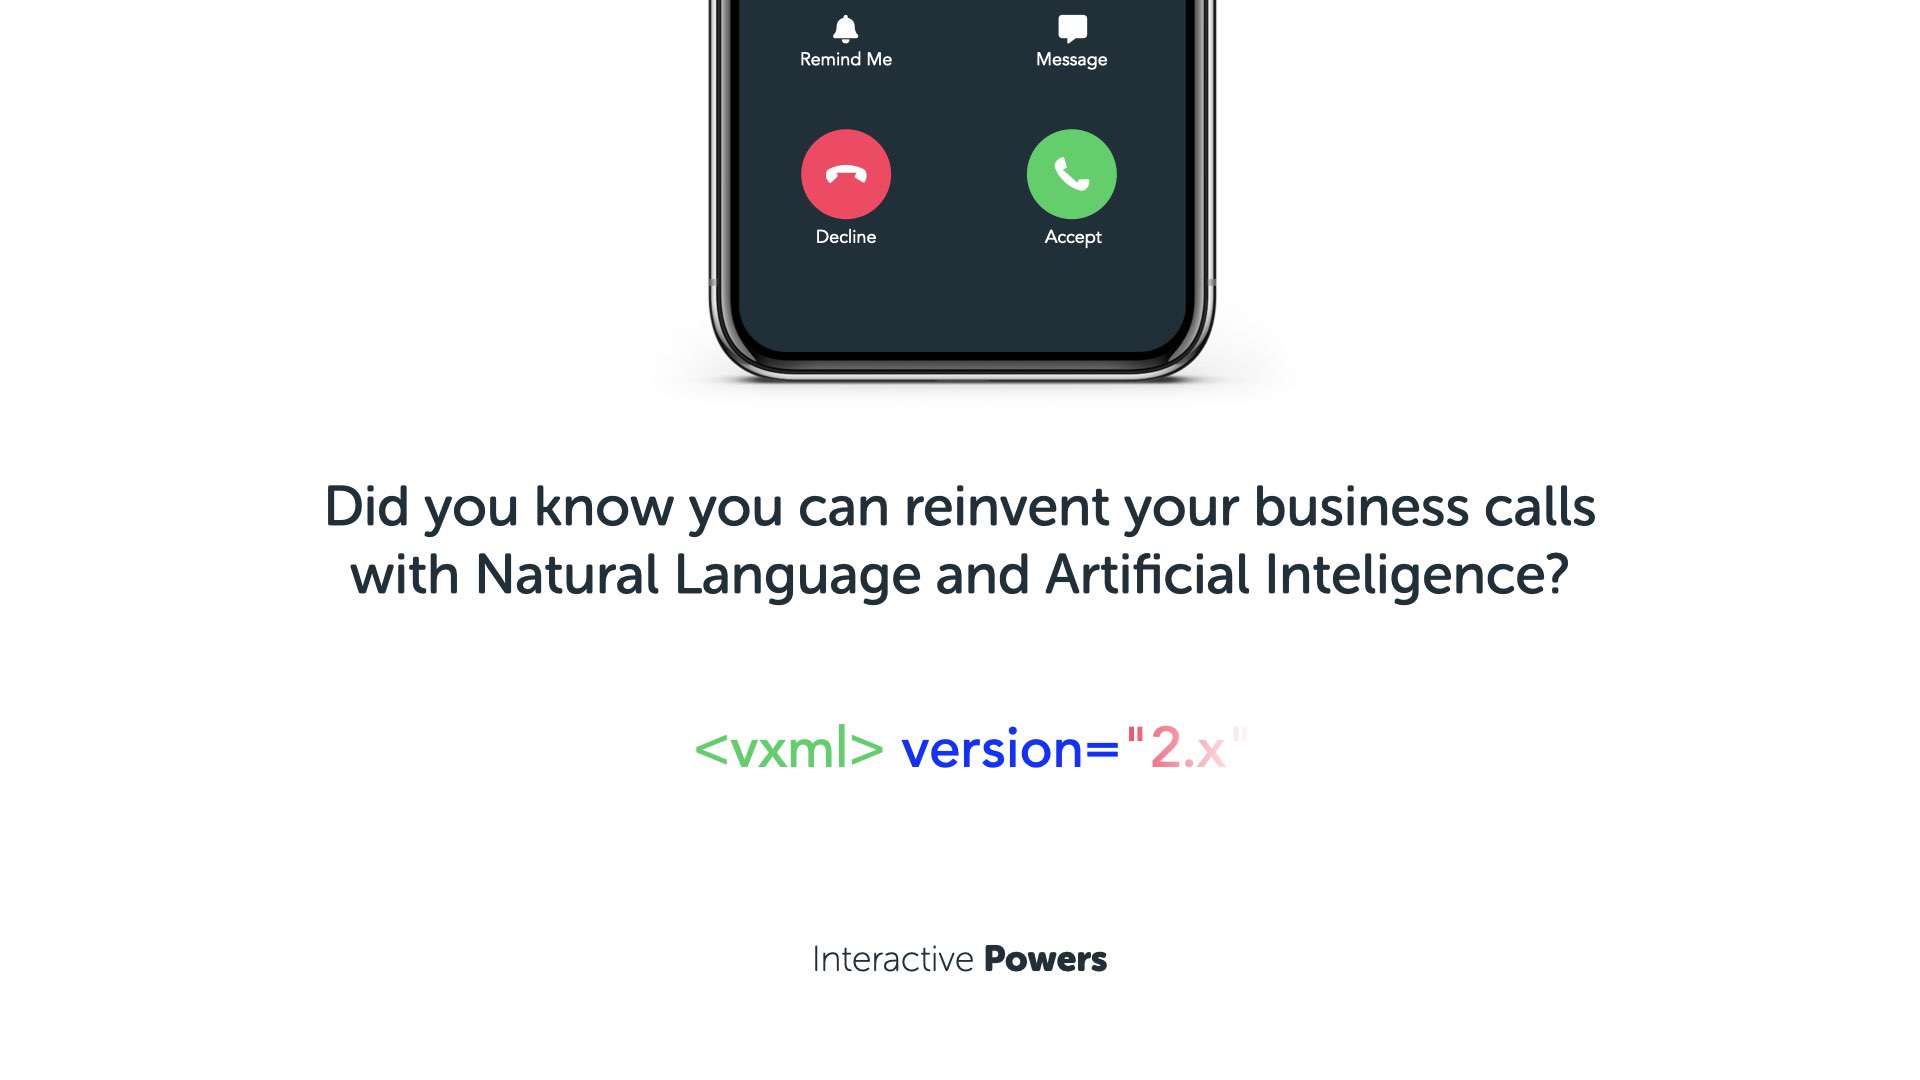 Did you know you can reinvent your business calls with Natural Language and Artificial Inteligence?